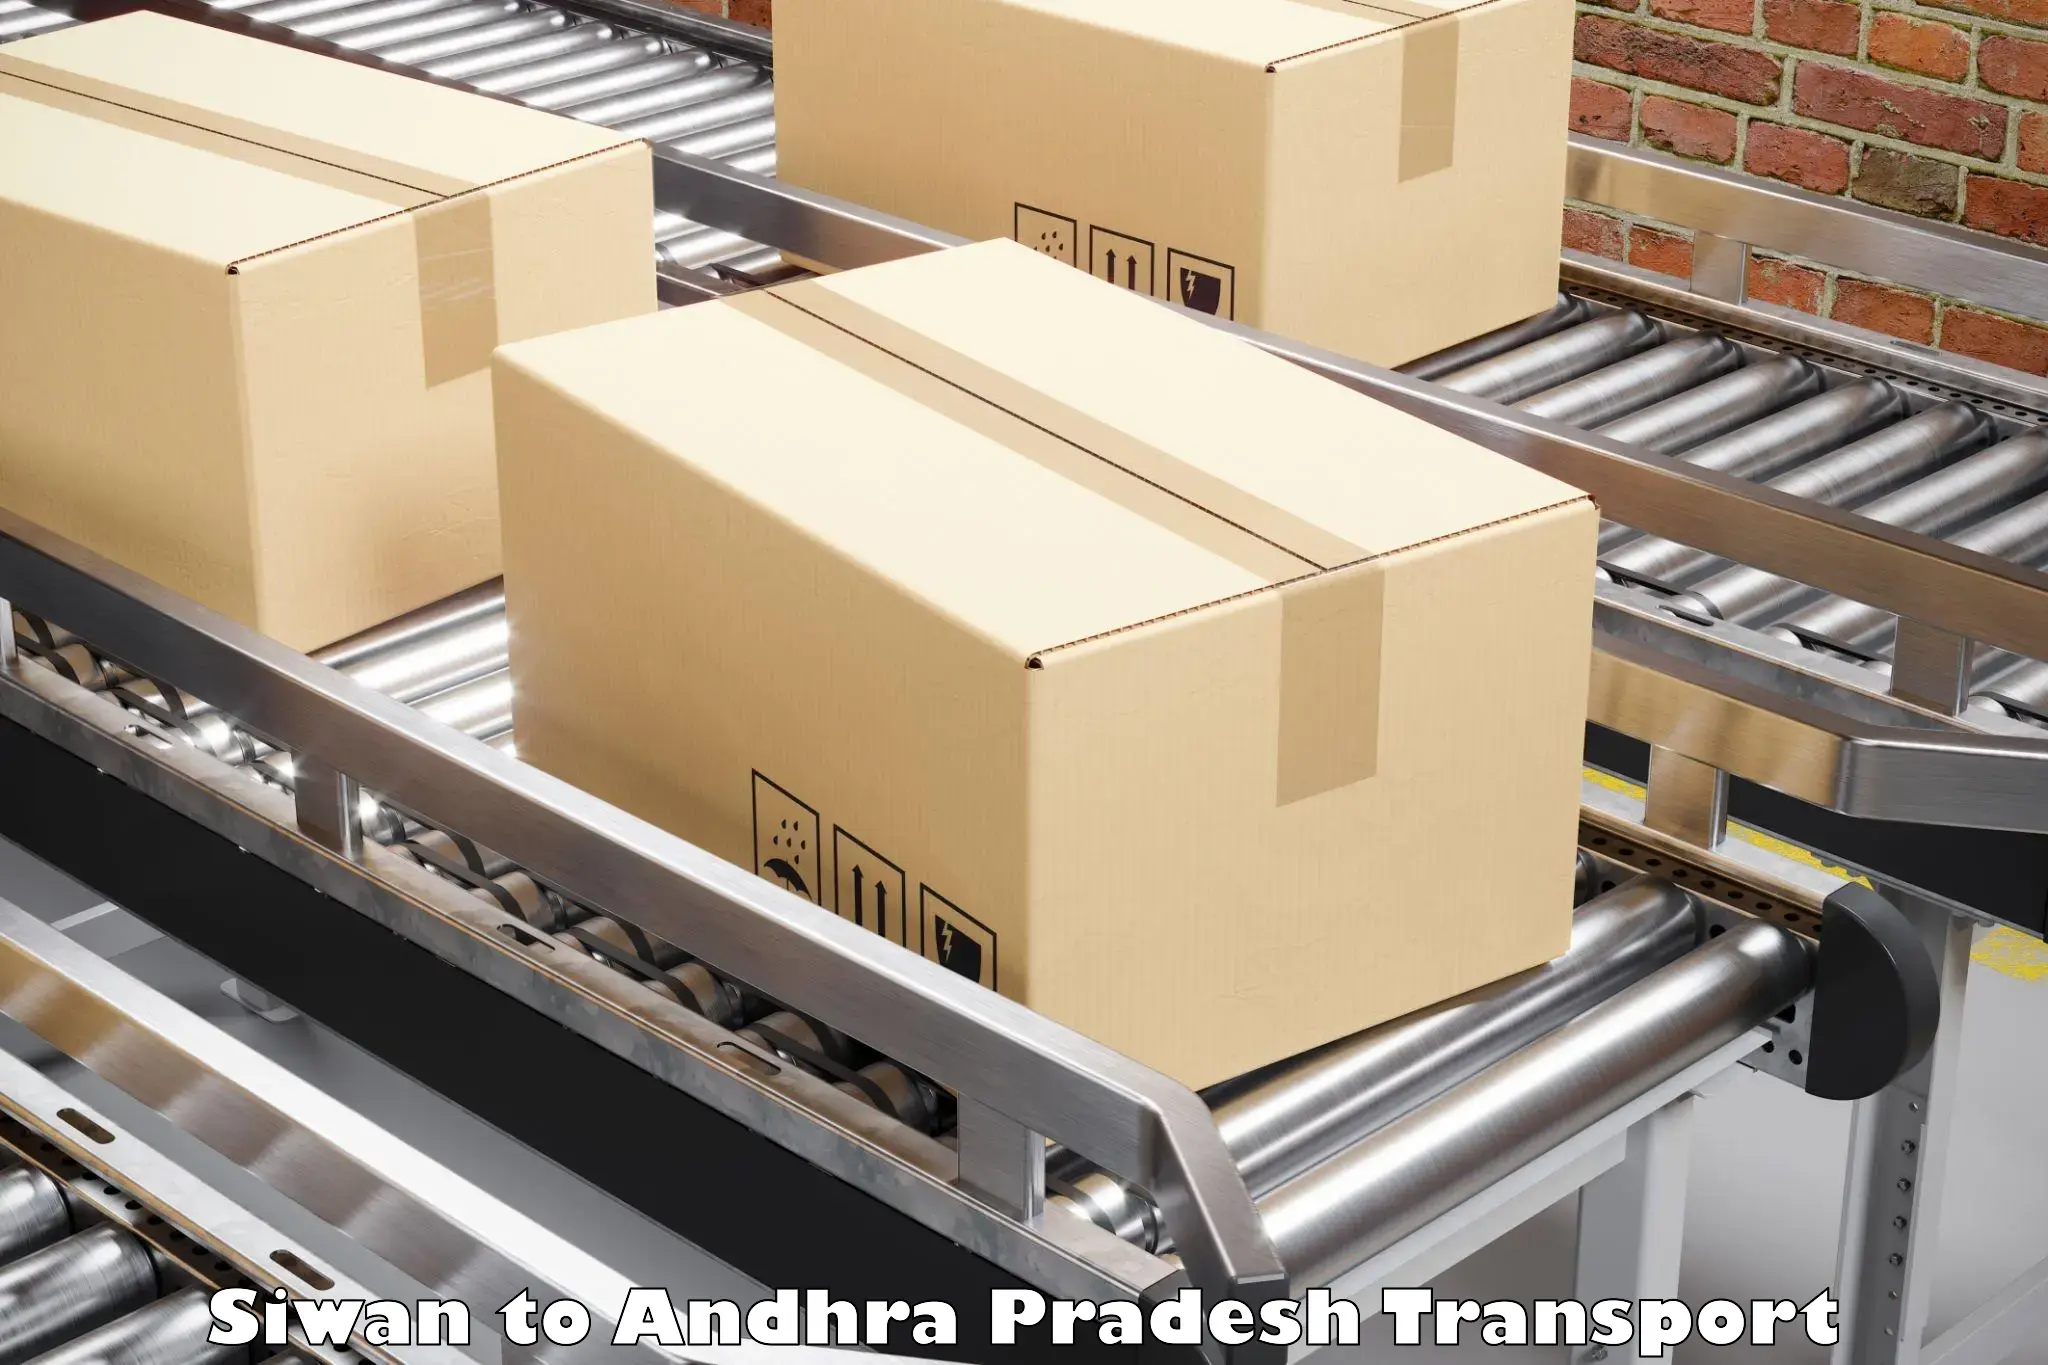 Part load transport service in India Siwan to Andhra Pradesh